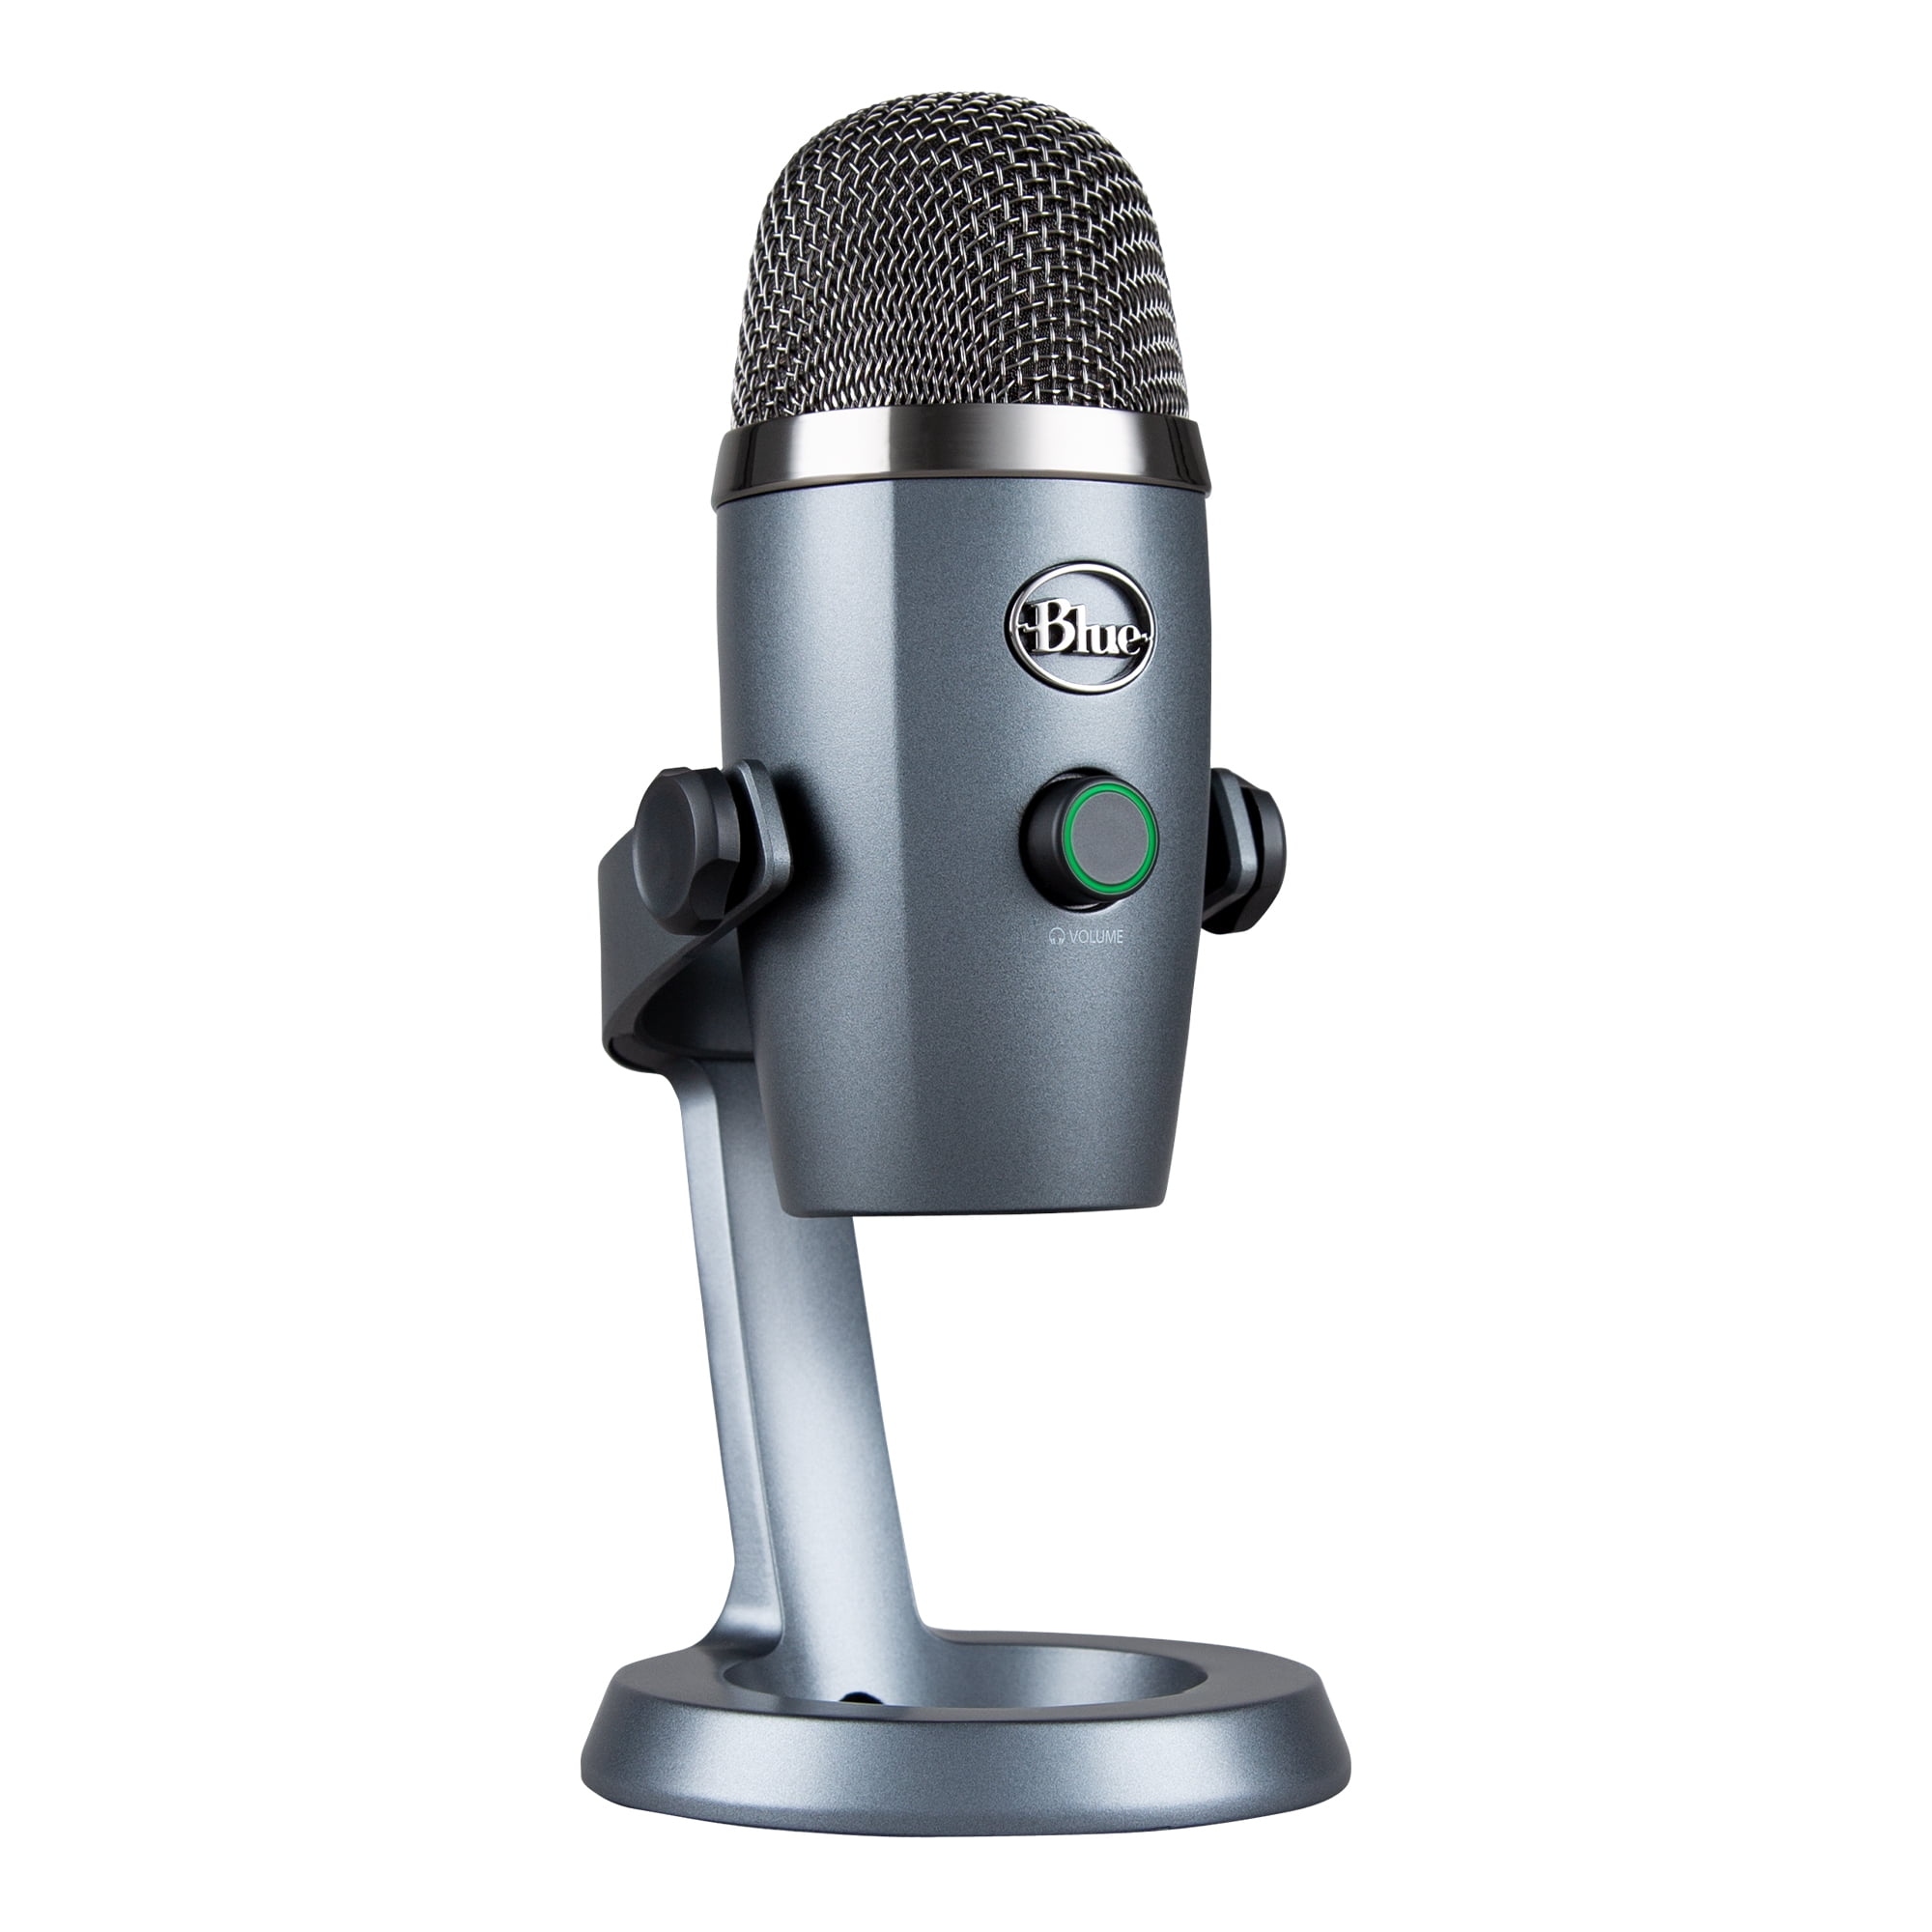 Blue brings out a baby Yeti microphone for podcasters and